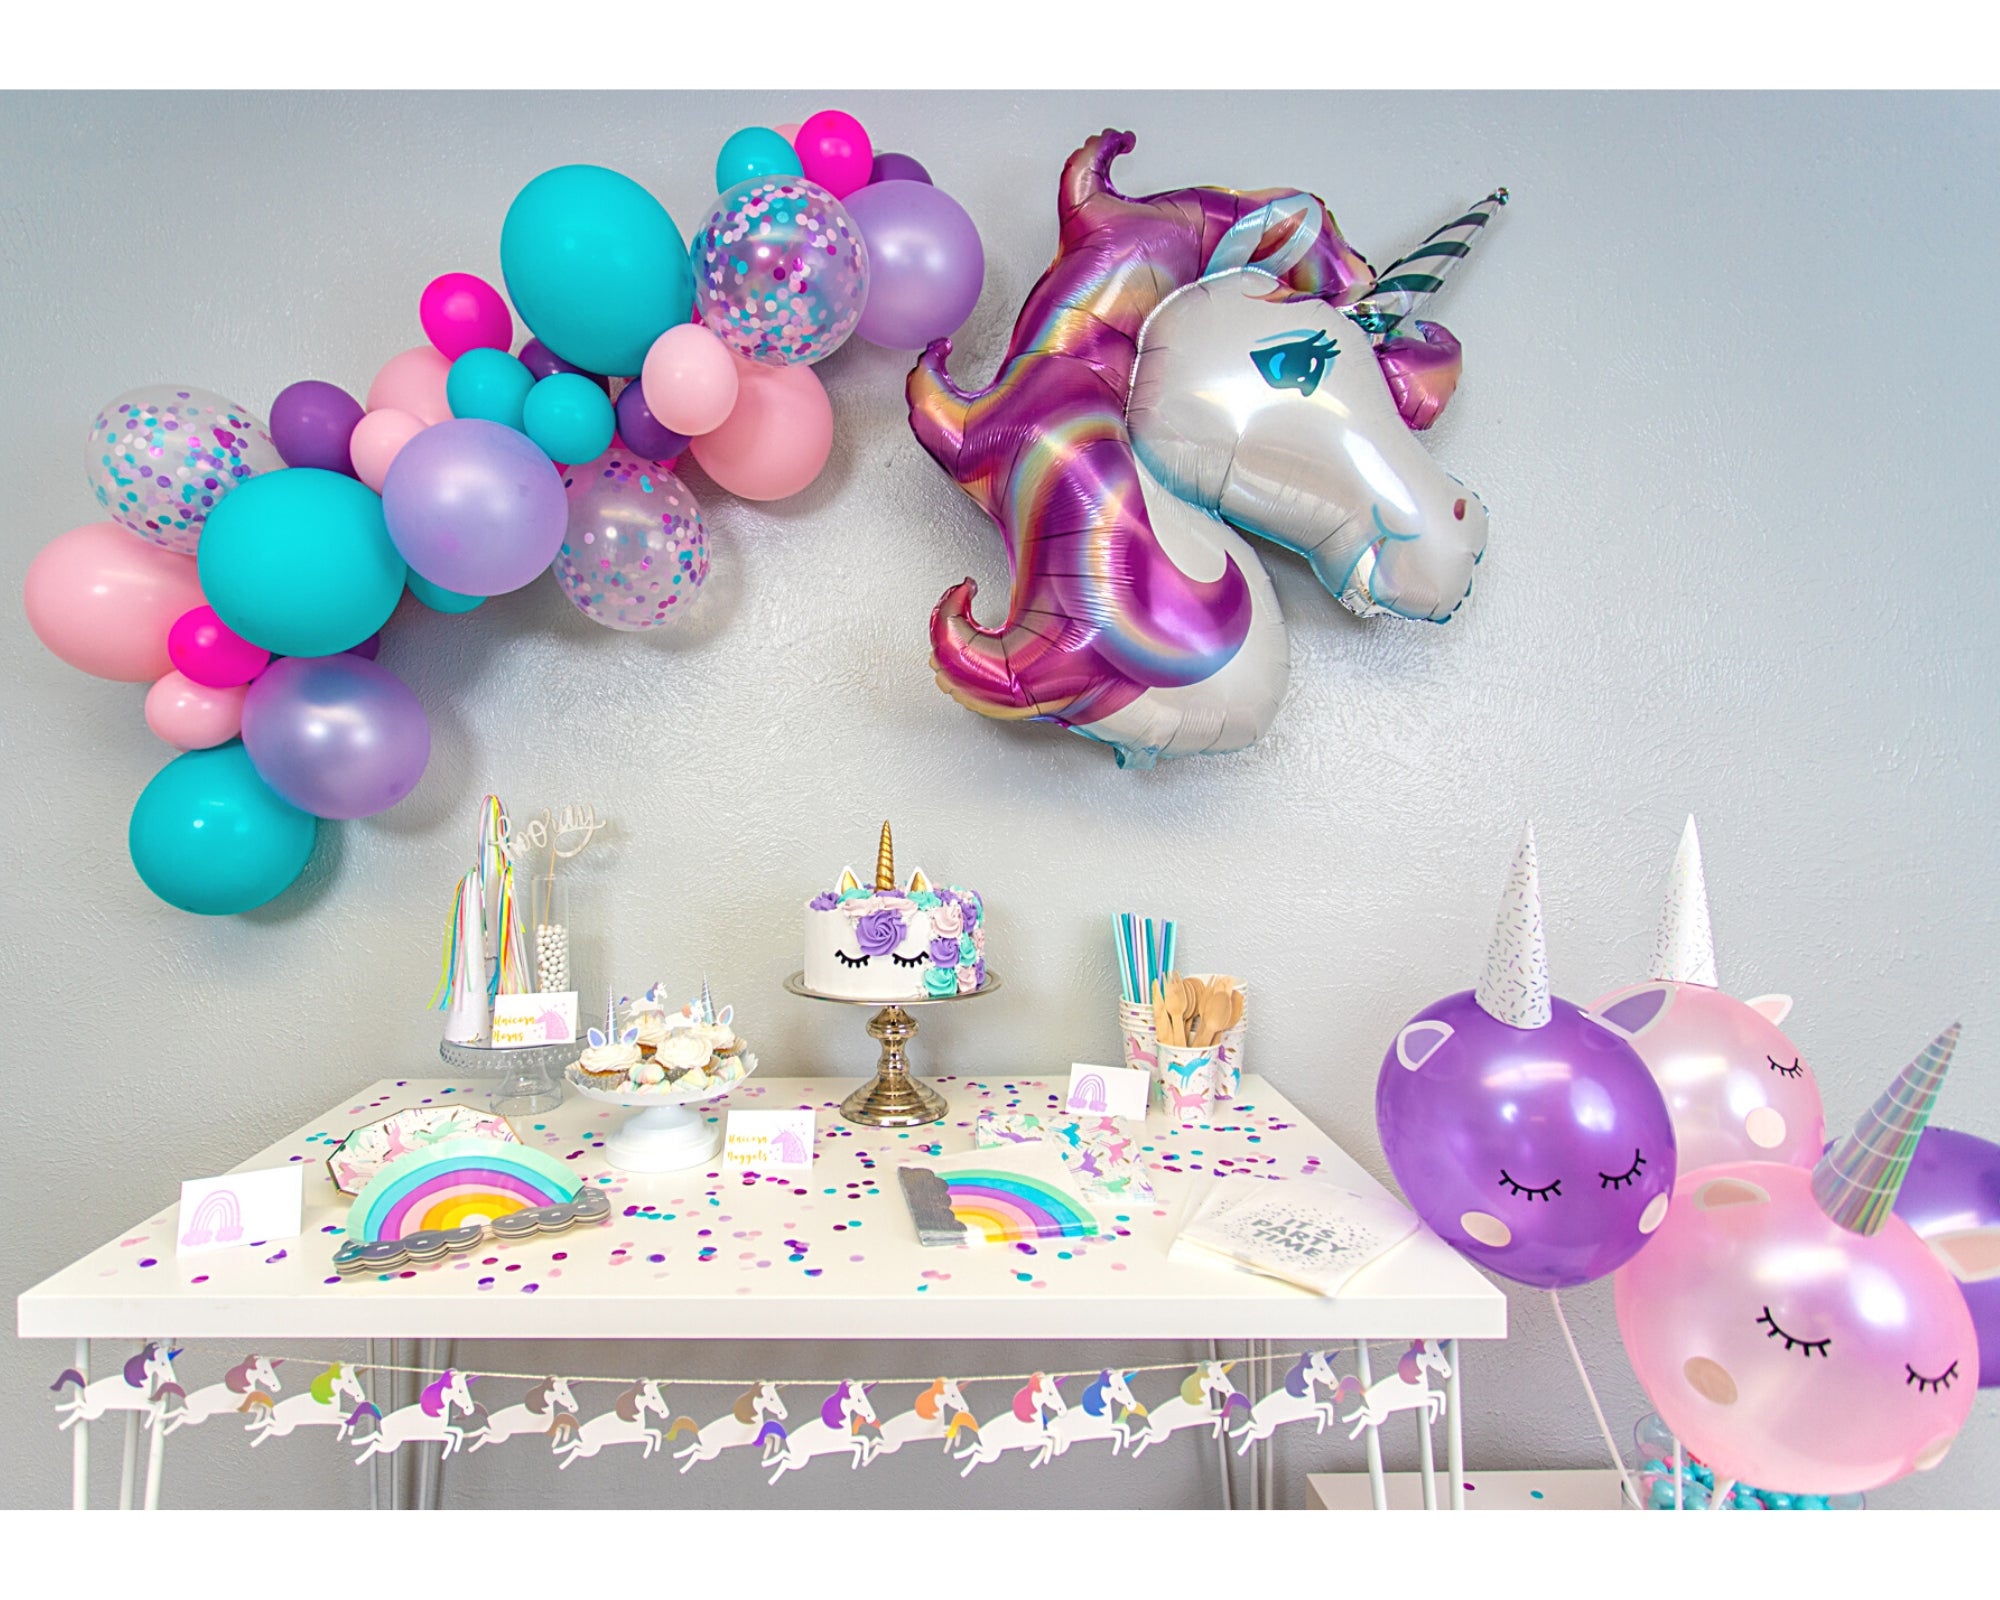 Cagey Party Crafts For Toddlers #partynextdoor #PartyCraftsDiy  Rainbow  first birthday, Unicorn birthday party decorations, Rainbow birthday party